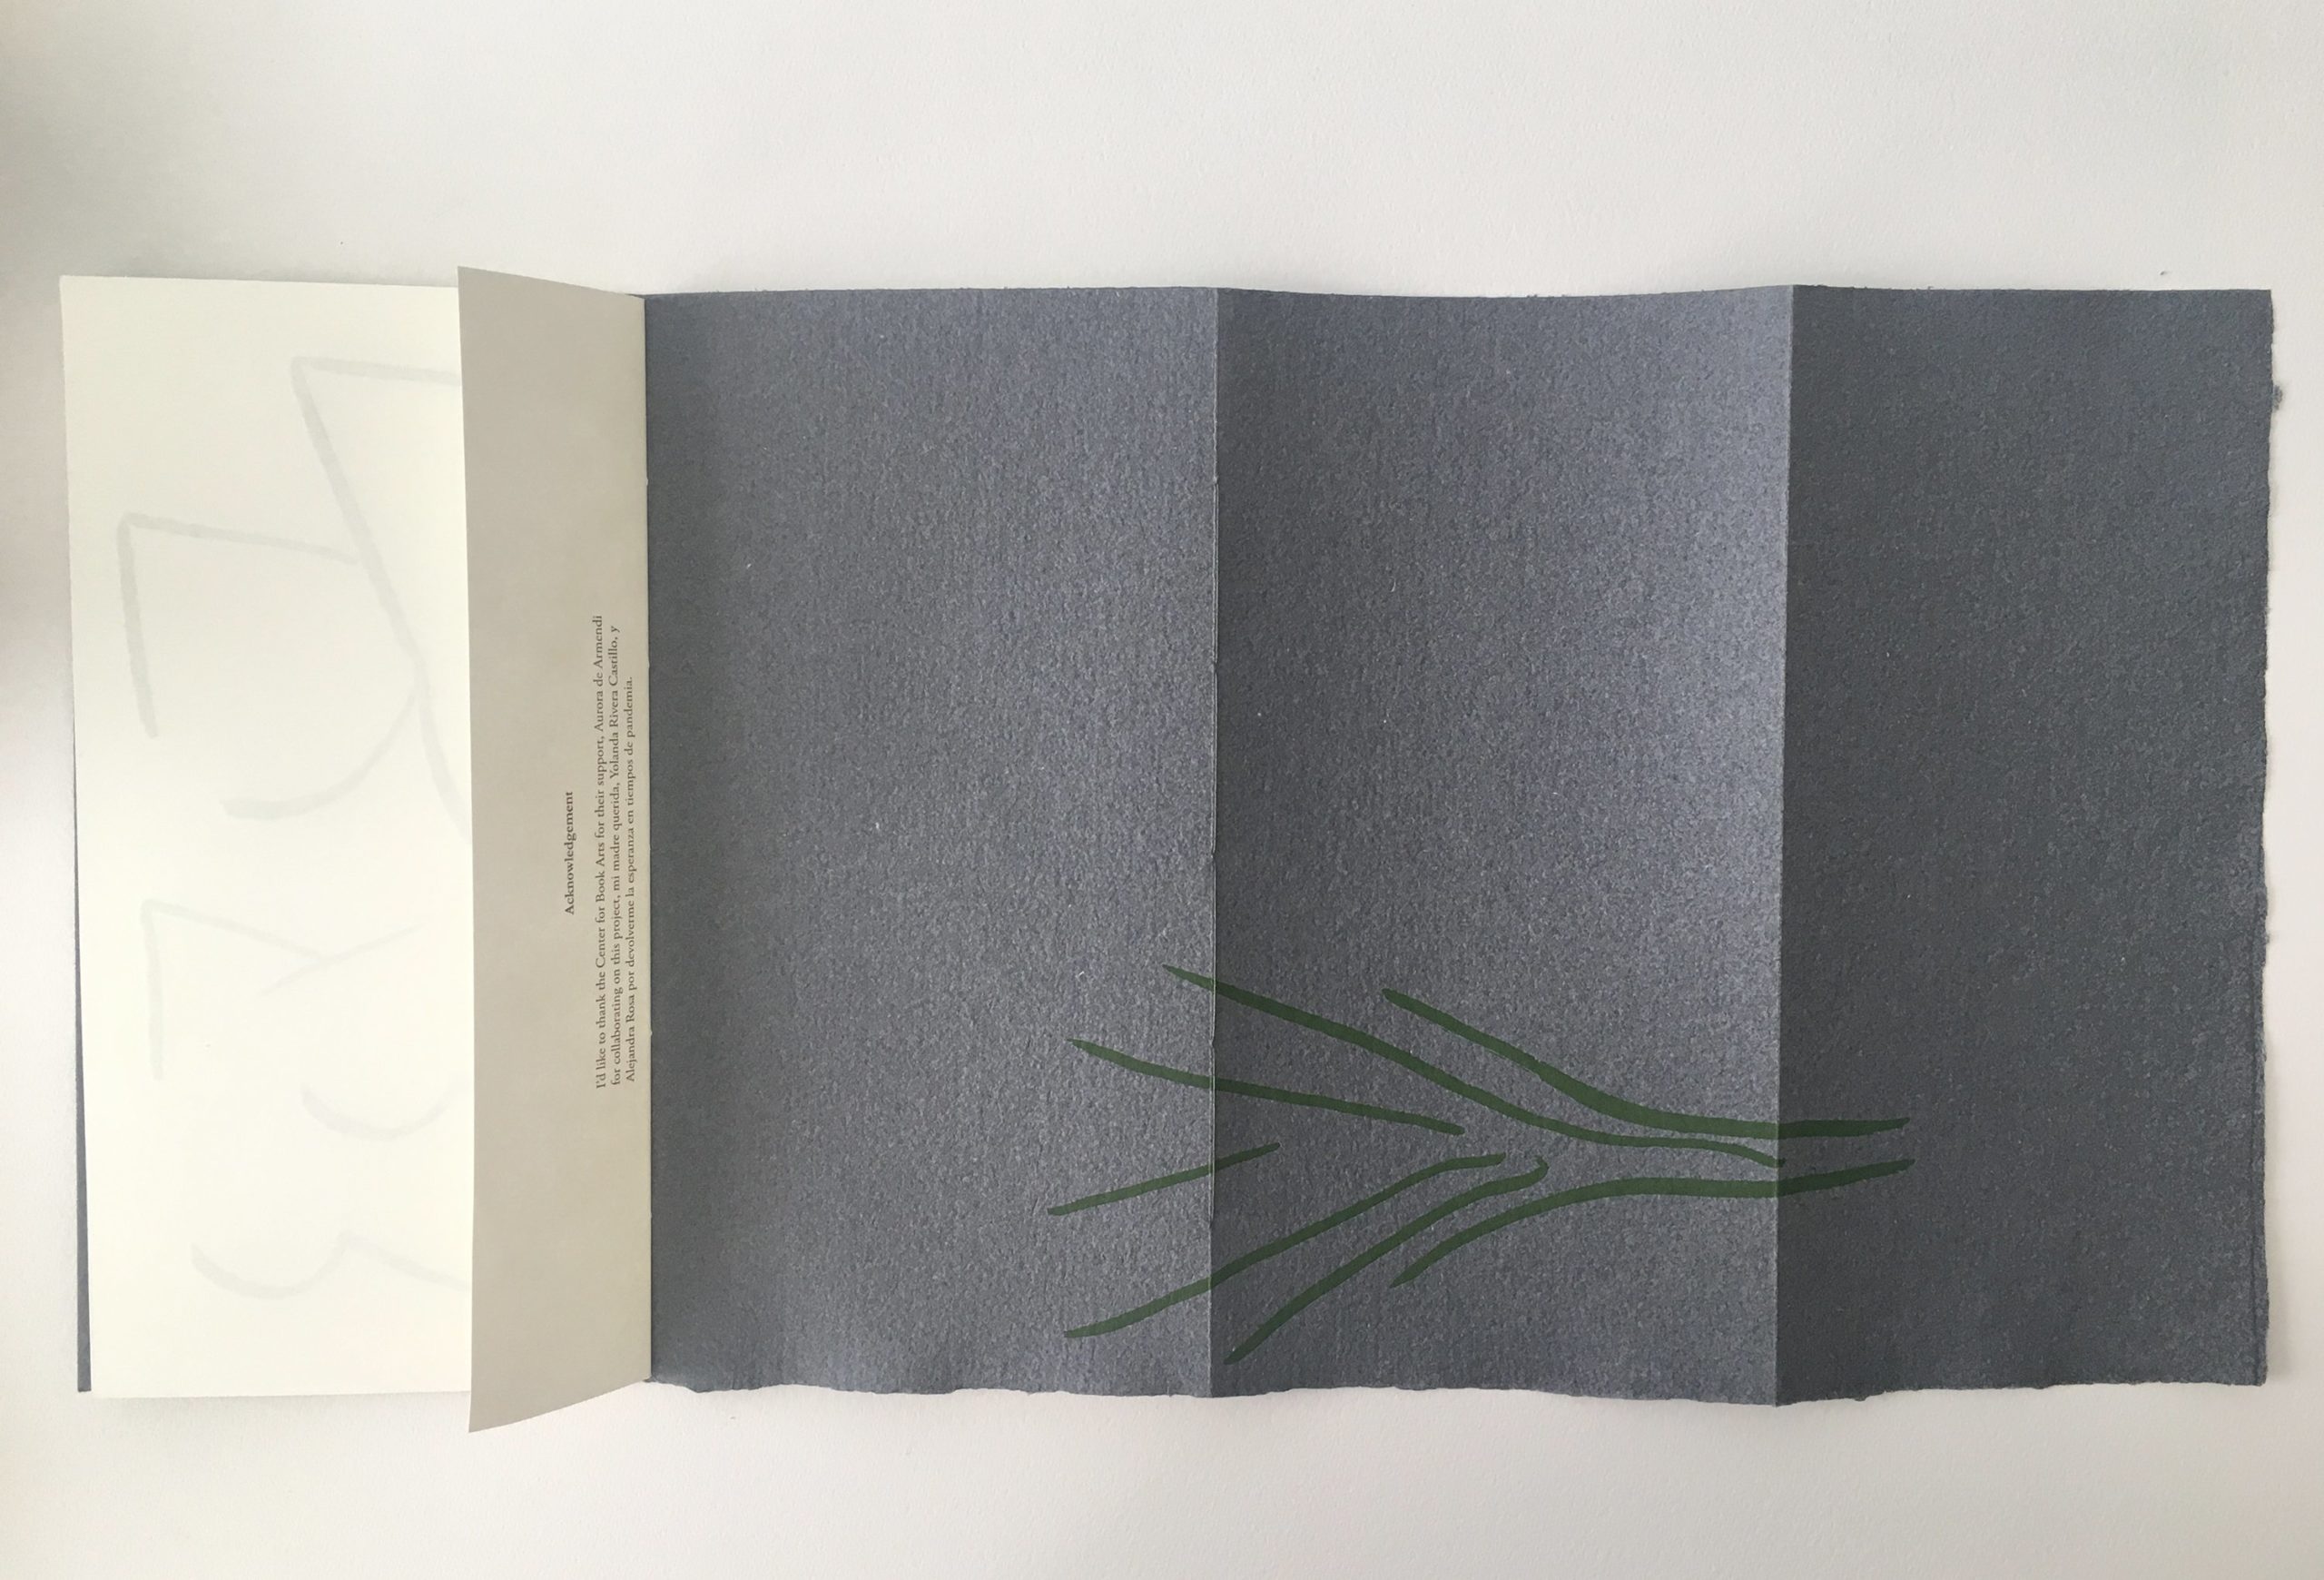 book unfolded to show cover with green plant design